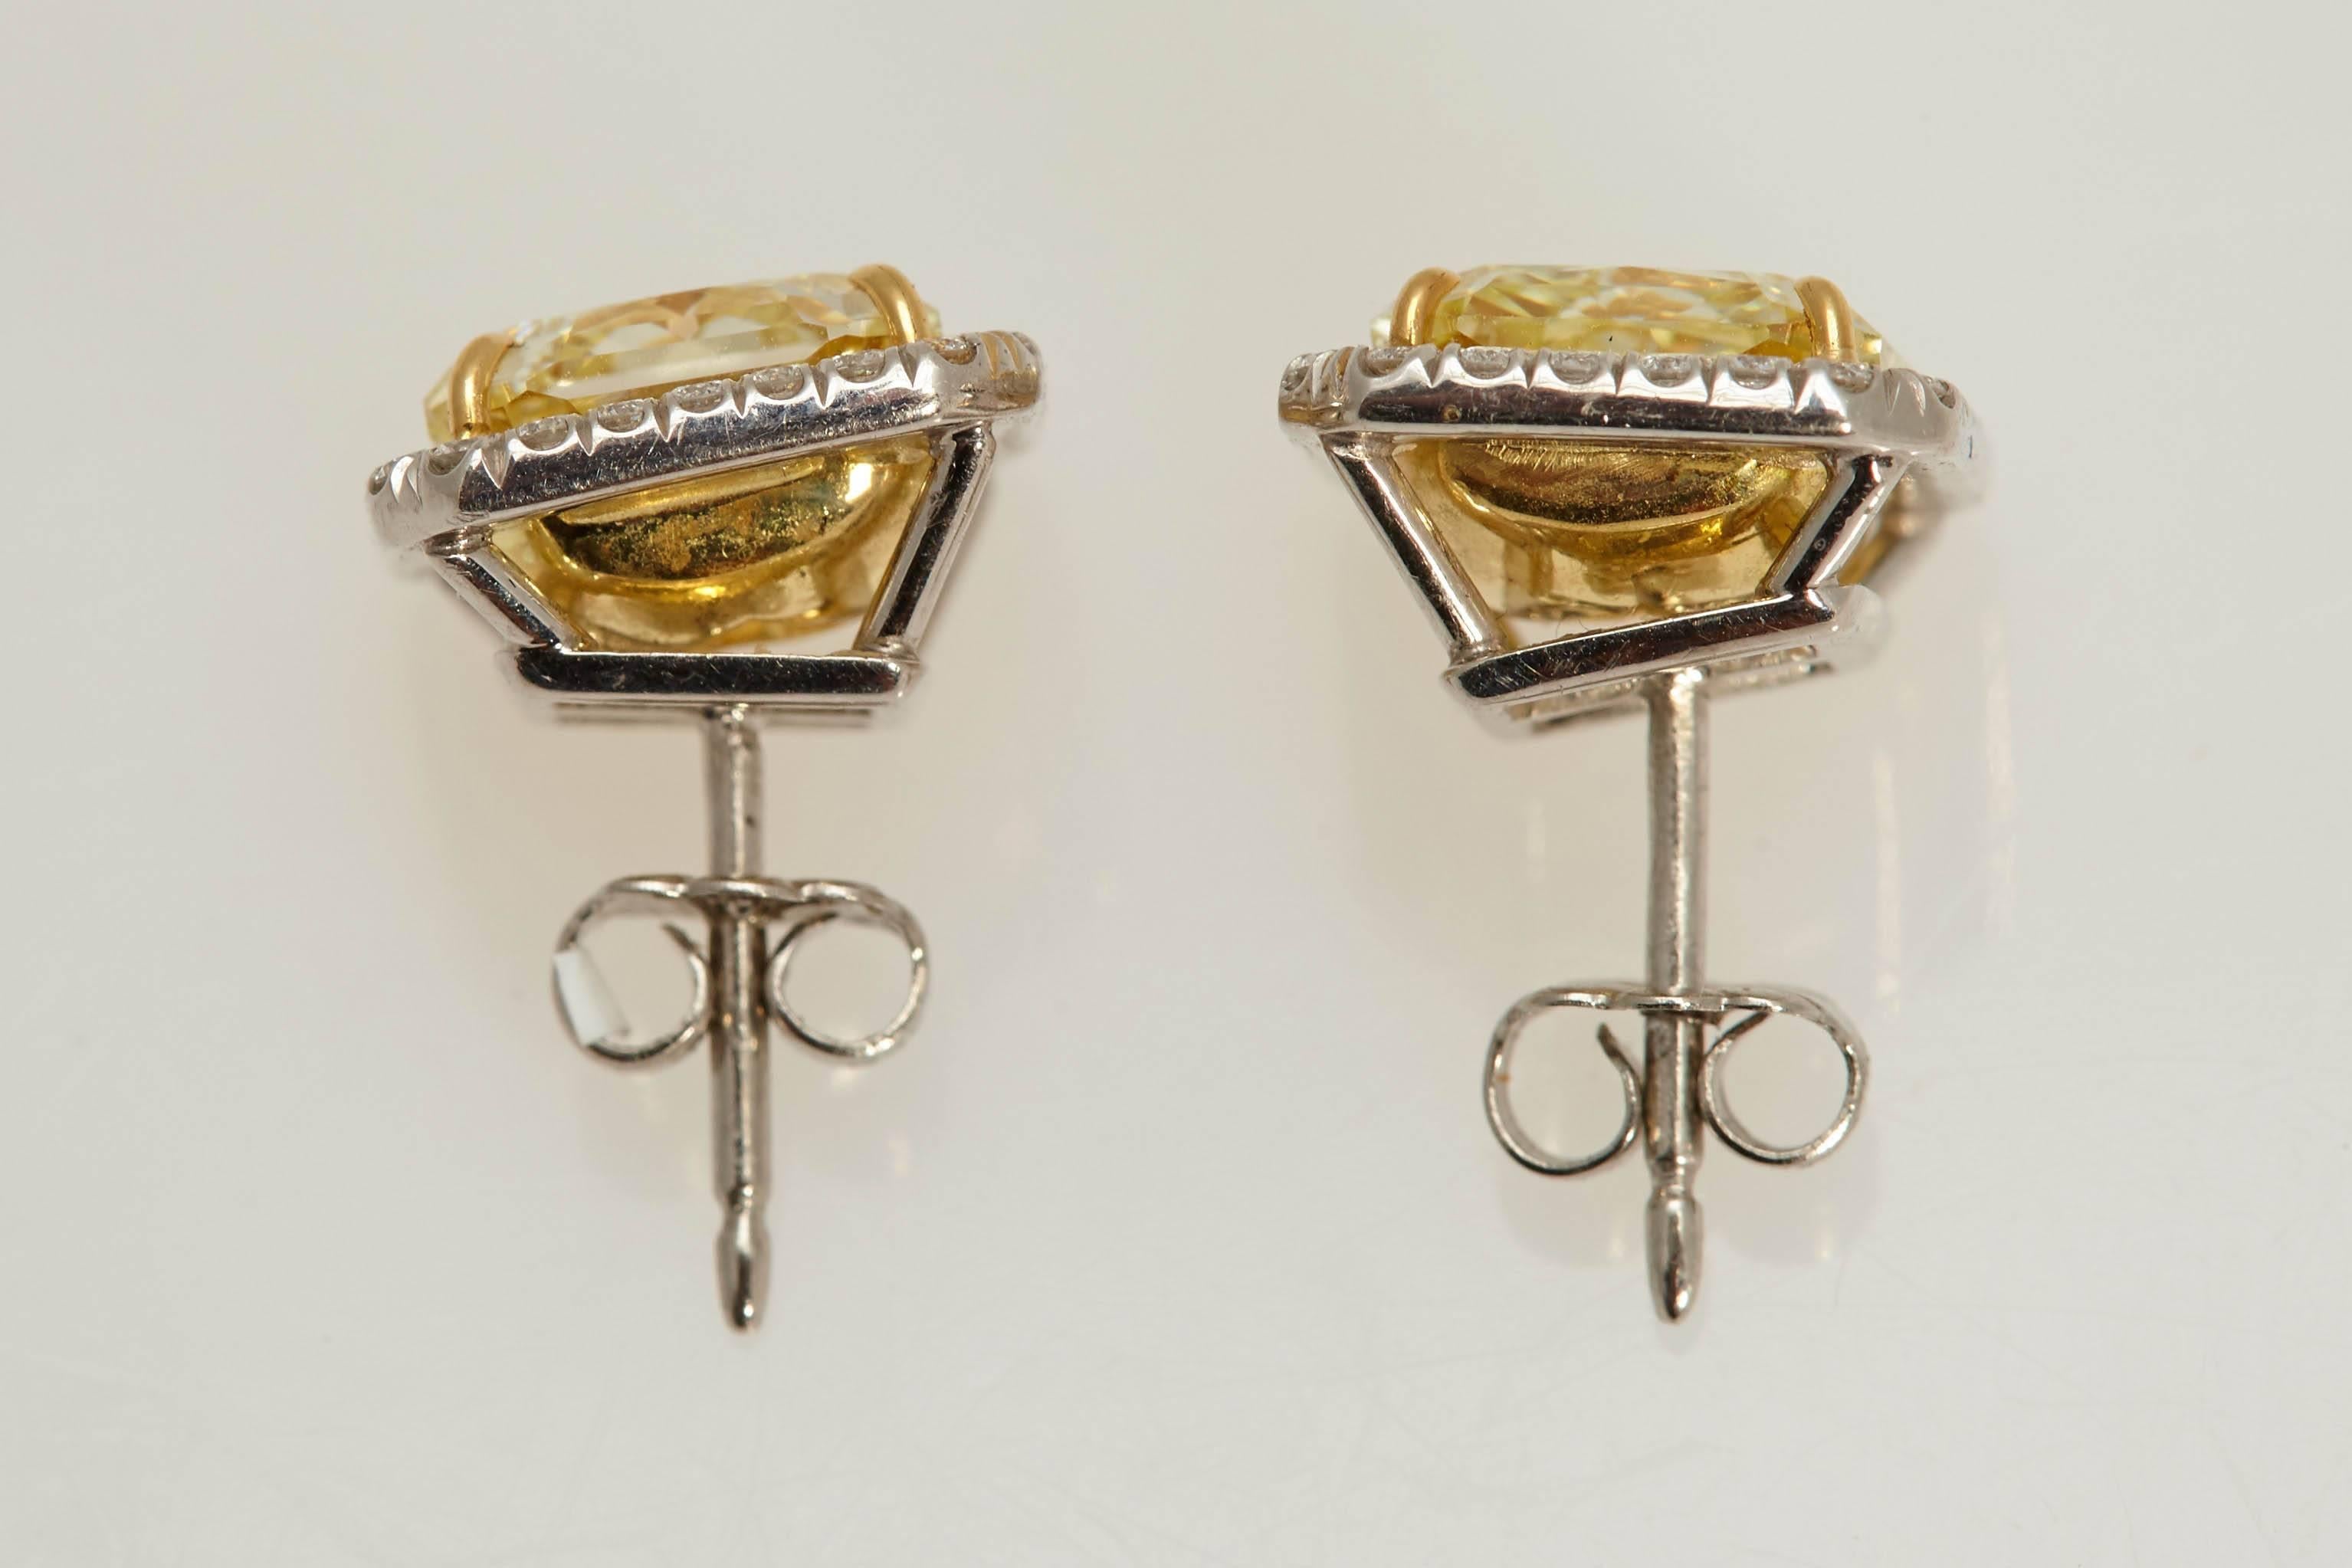 Radiant GIA Fancy Yellow Diamond Earrings 6.61 Carat In Excellent Condition For Sale In New York, NY